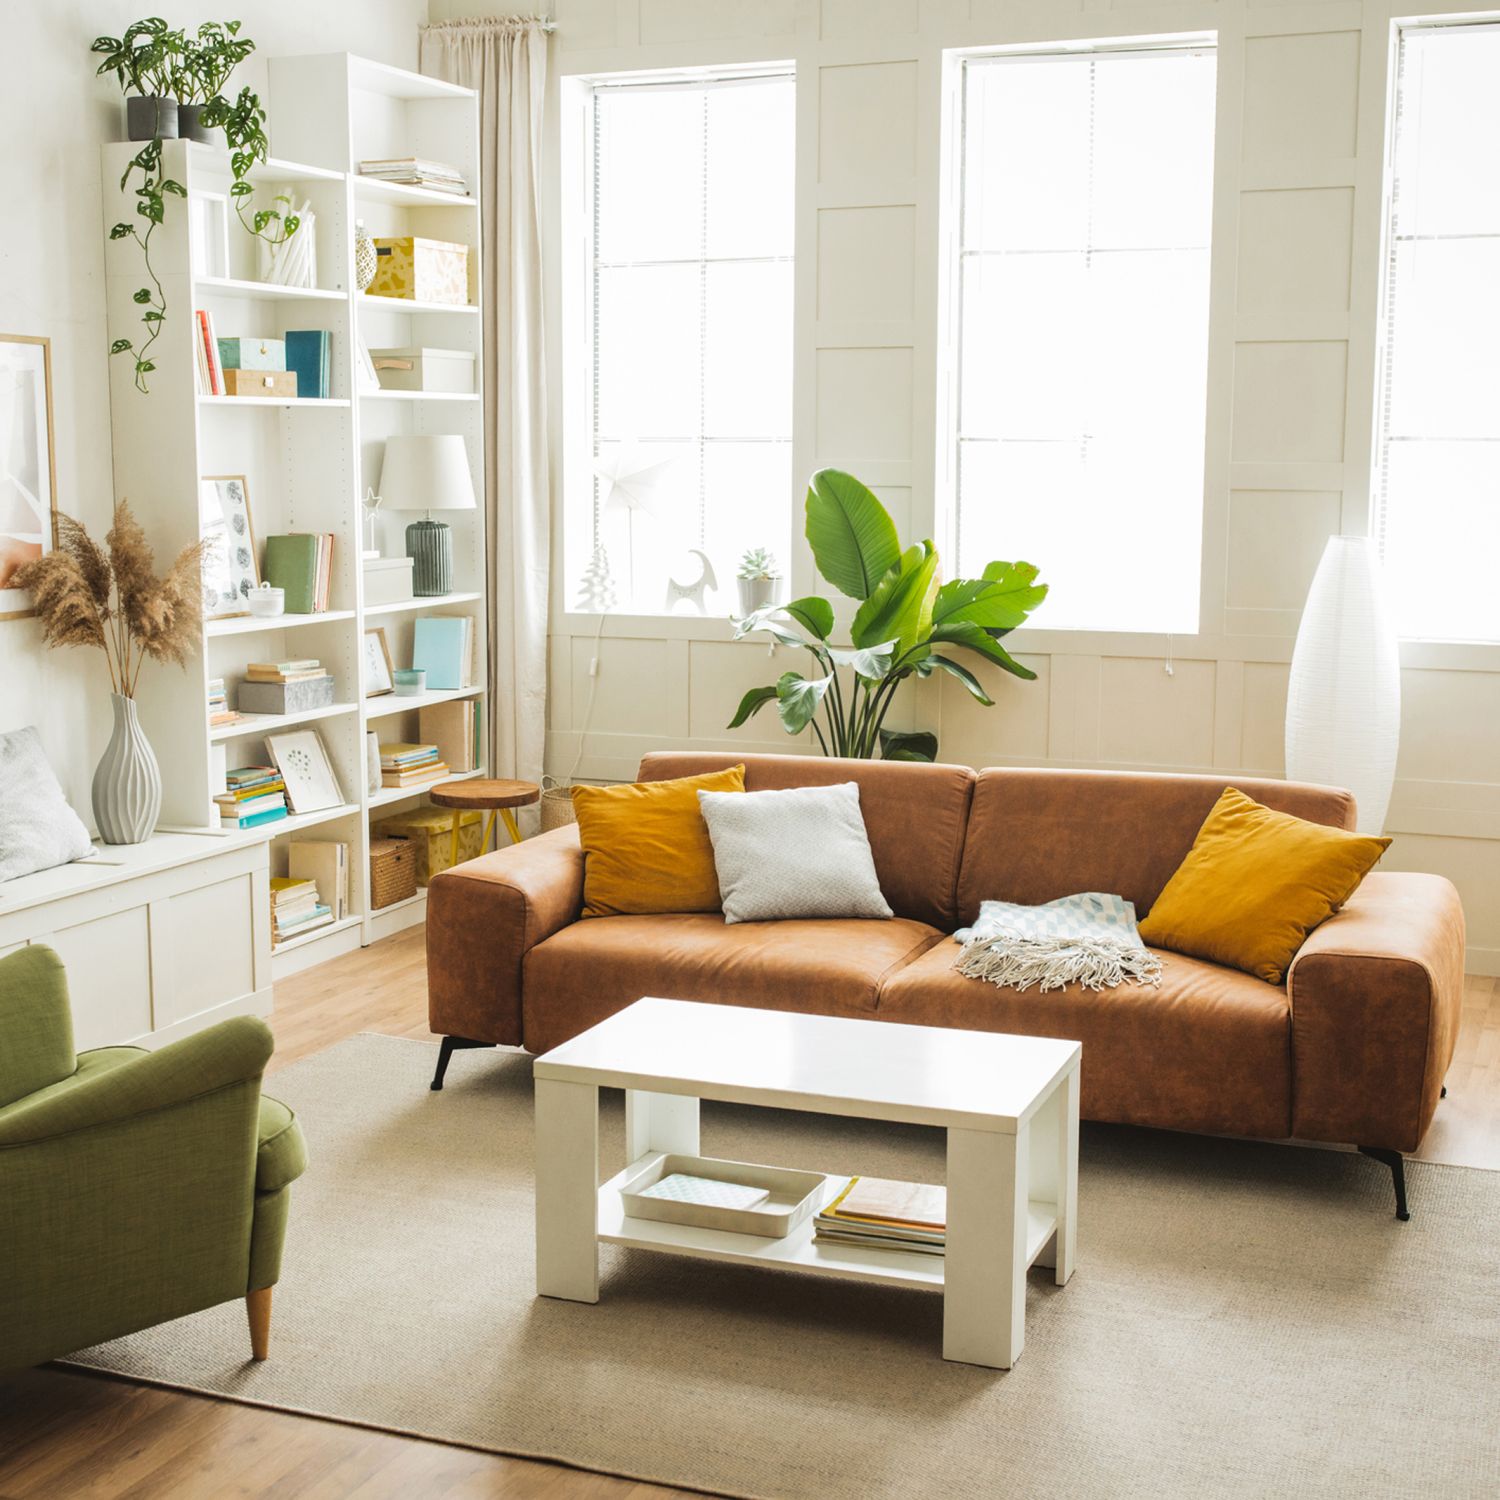 Interior of organized home living room with leather sofa, green armchair, storage, table and plants.